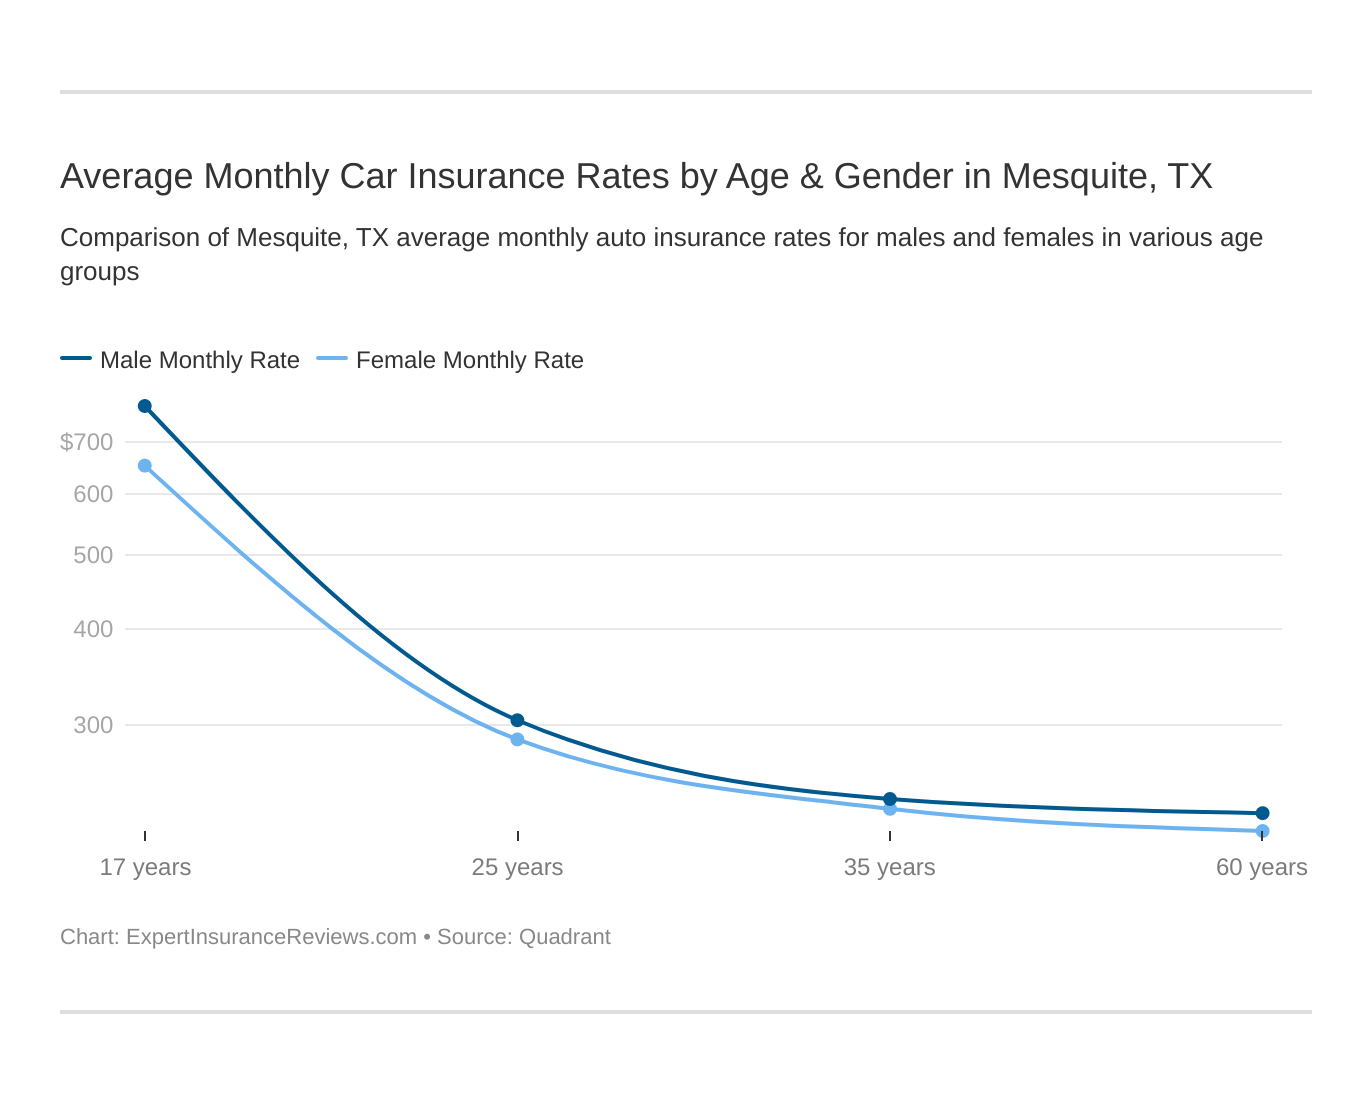 Average Monthly Car Insurance Rates by Age & Gender in Mesquite, TX